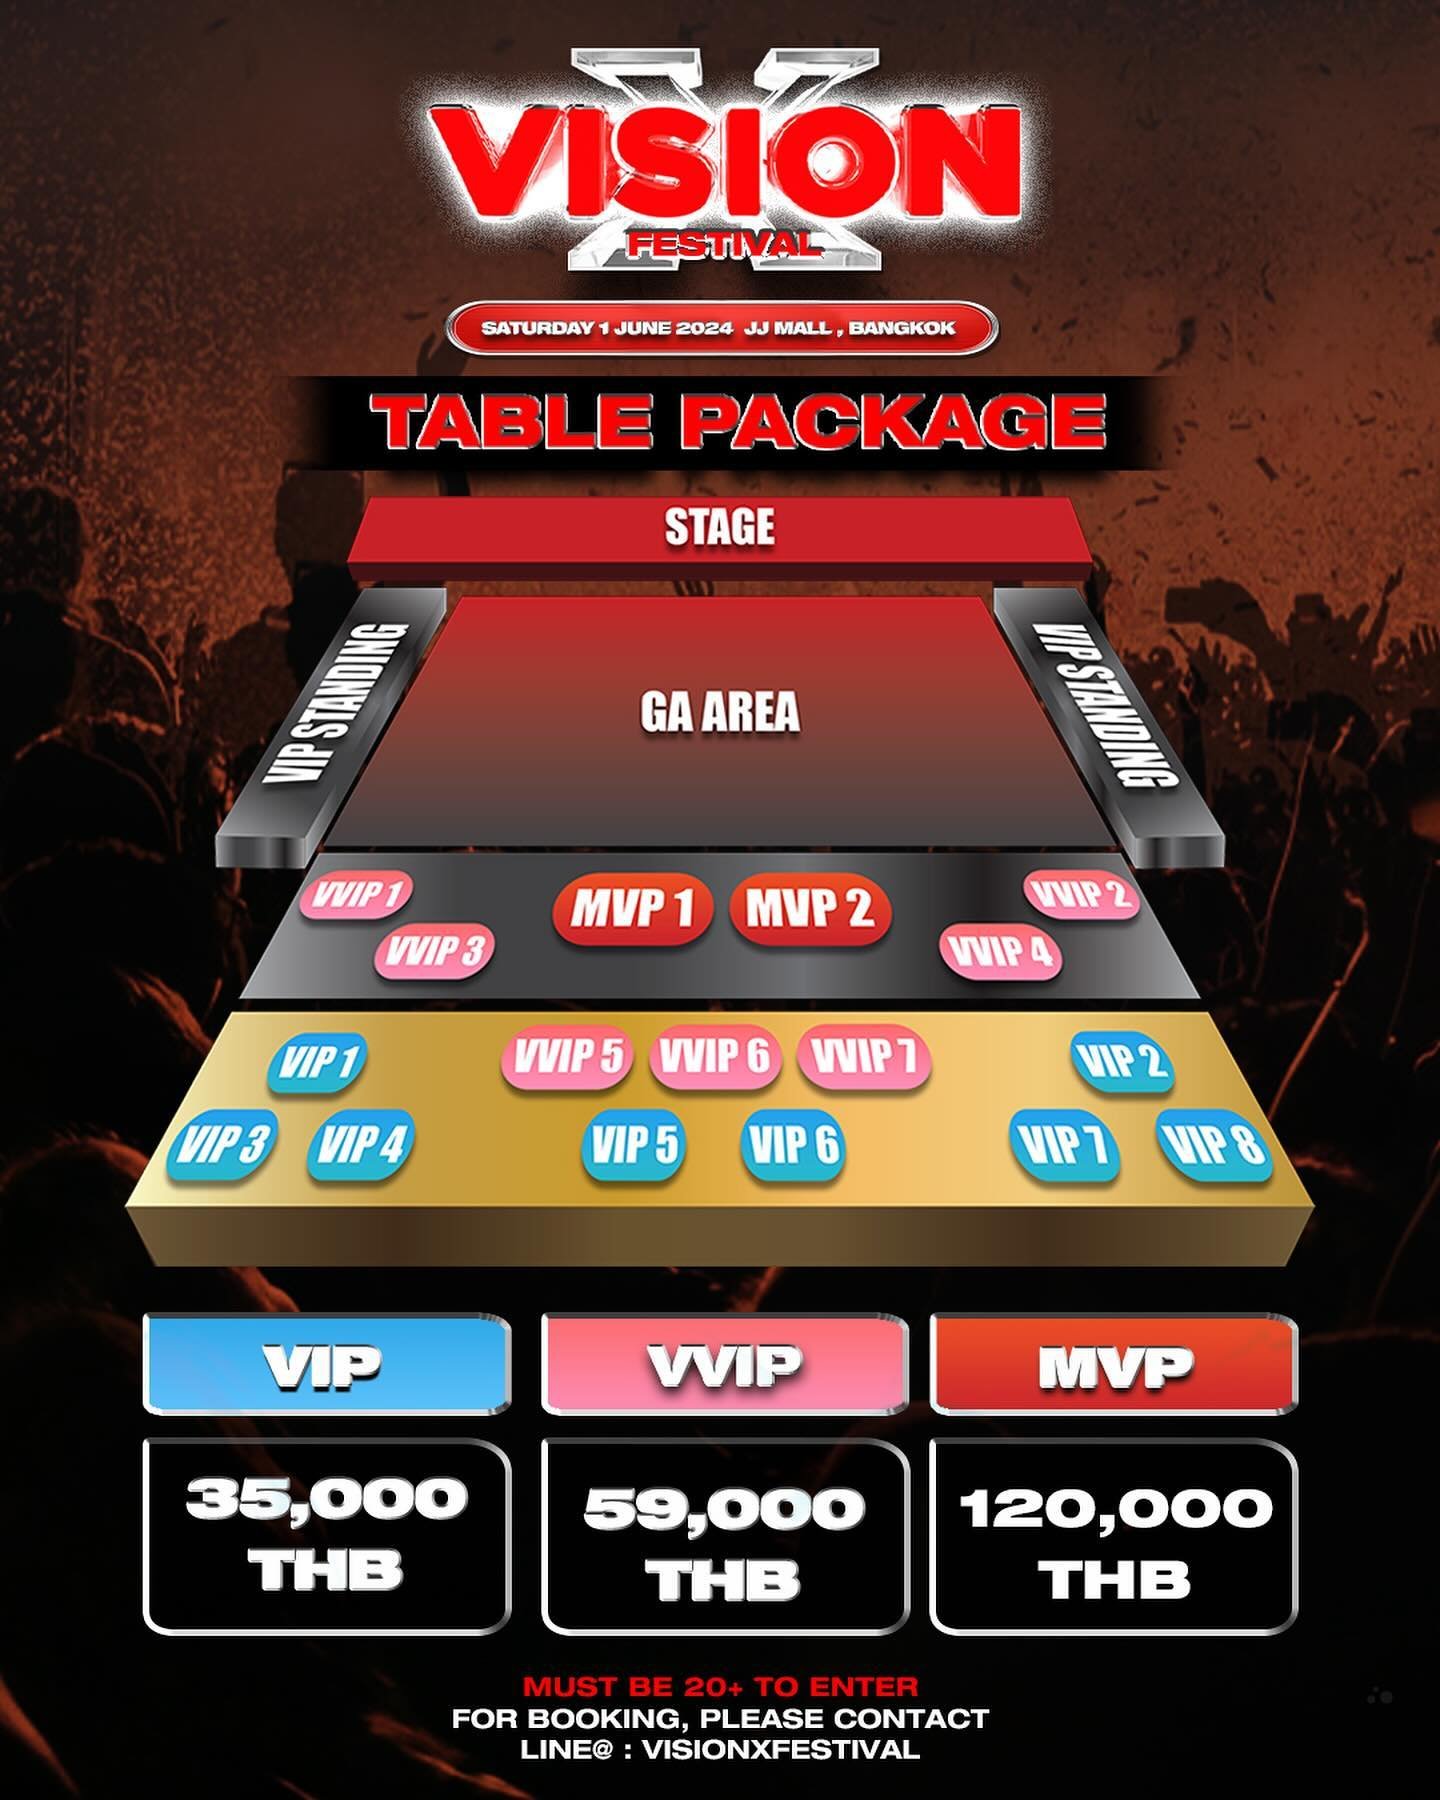 VISION X TABLE PACKAGES ON SALE NOW 🥳‼️

LET&rsquo;S PUSH THE EXPERIENCE TO THE MAX 🤩🥂 FOR TABLE BOOKING PLEASE CONTACT OUR LINE OFFICIAL ACCOUNT : @VISIONXFESTIVAL 🍾

มาเปิดประสบการณ์ให้สุดขีดกับโต้ะ VIP ของเรา 🤩🥂 สนใจจองโต้ะสามารถติดต่อสอบถาม